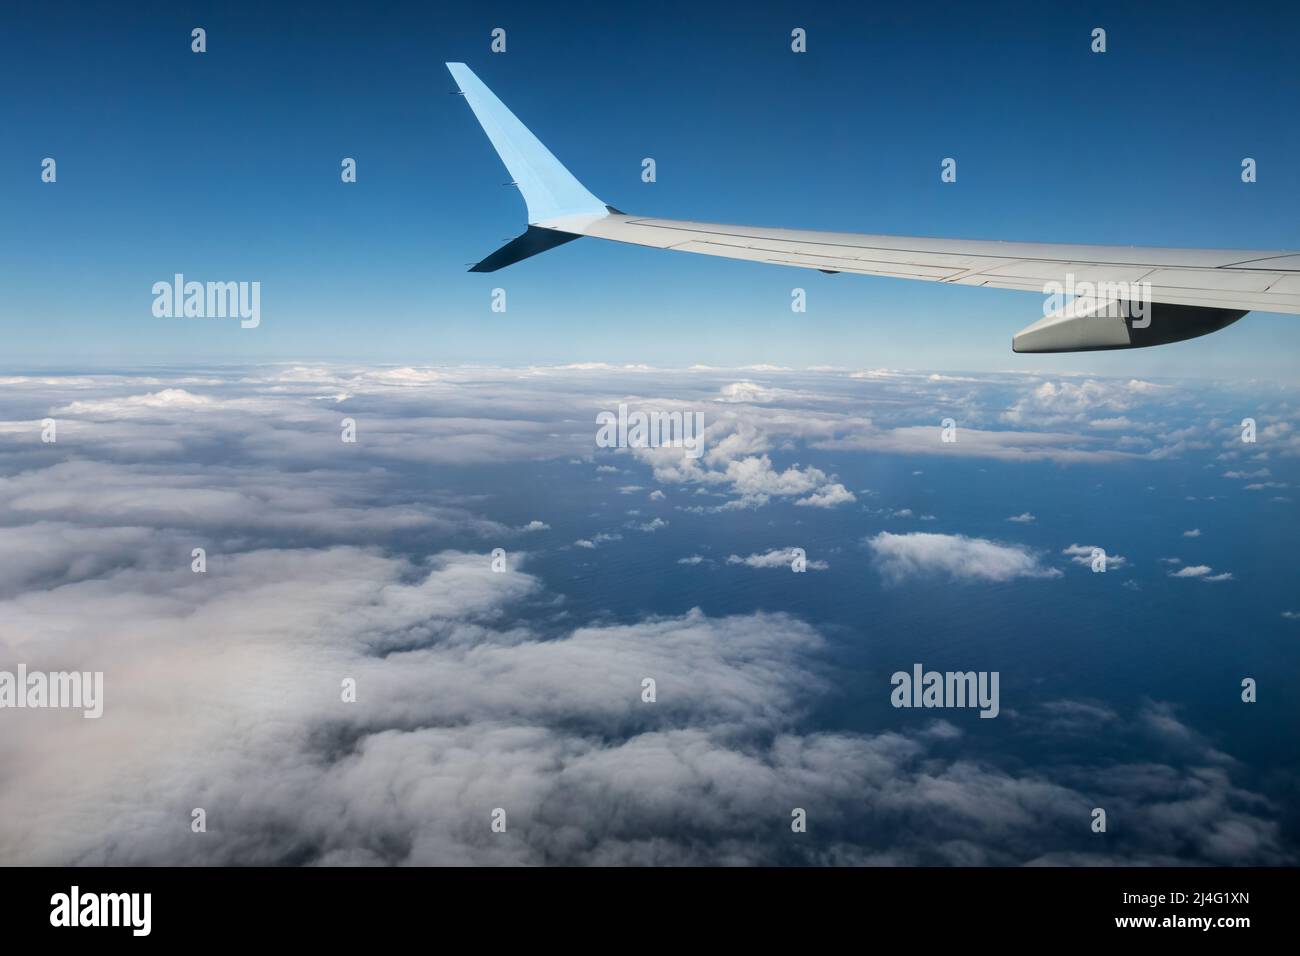 Wing of an airplane flying above the Atlantic Ocean with view at white clouds Stock Photo